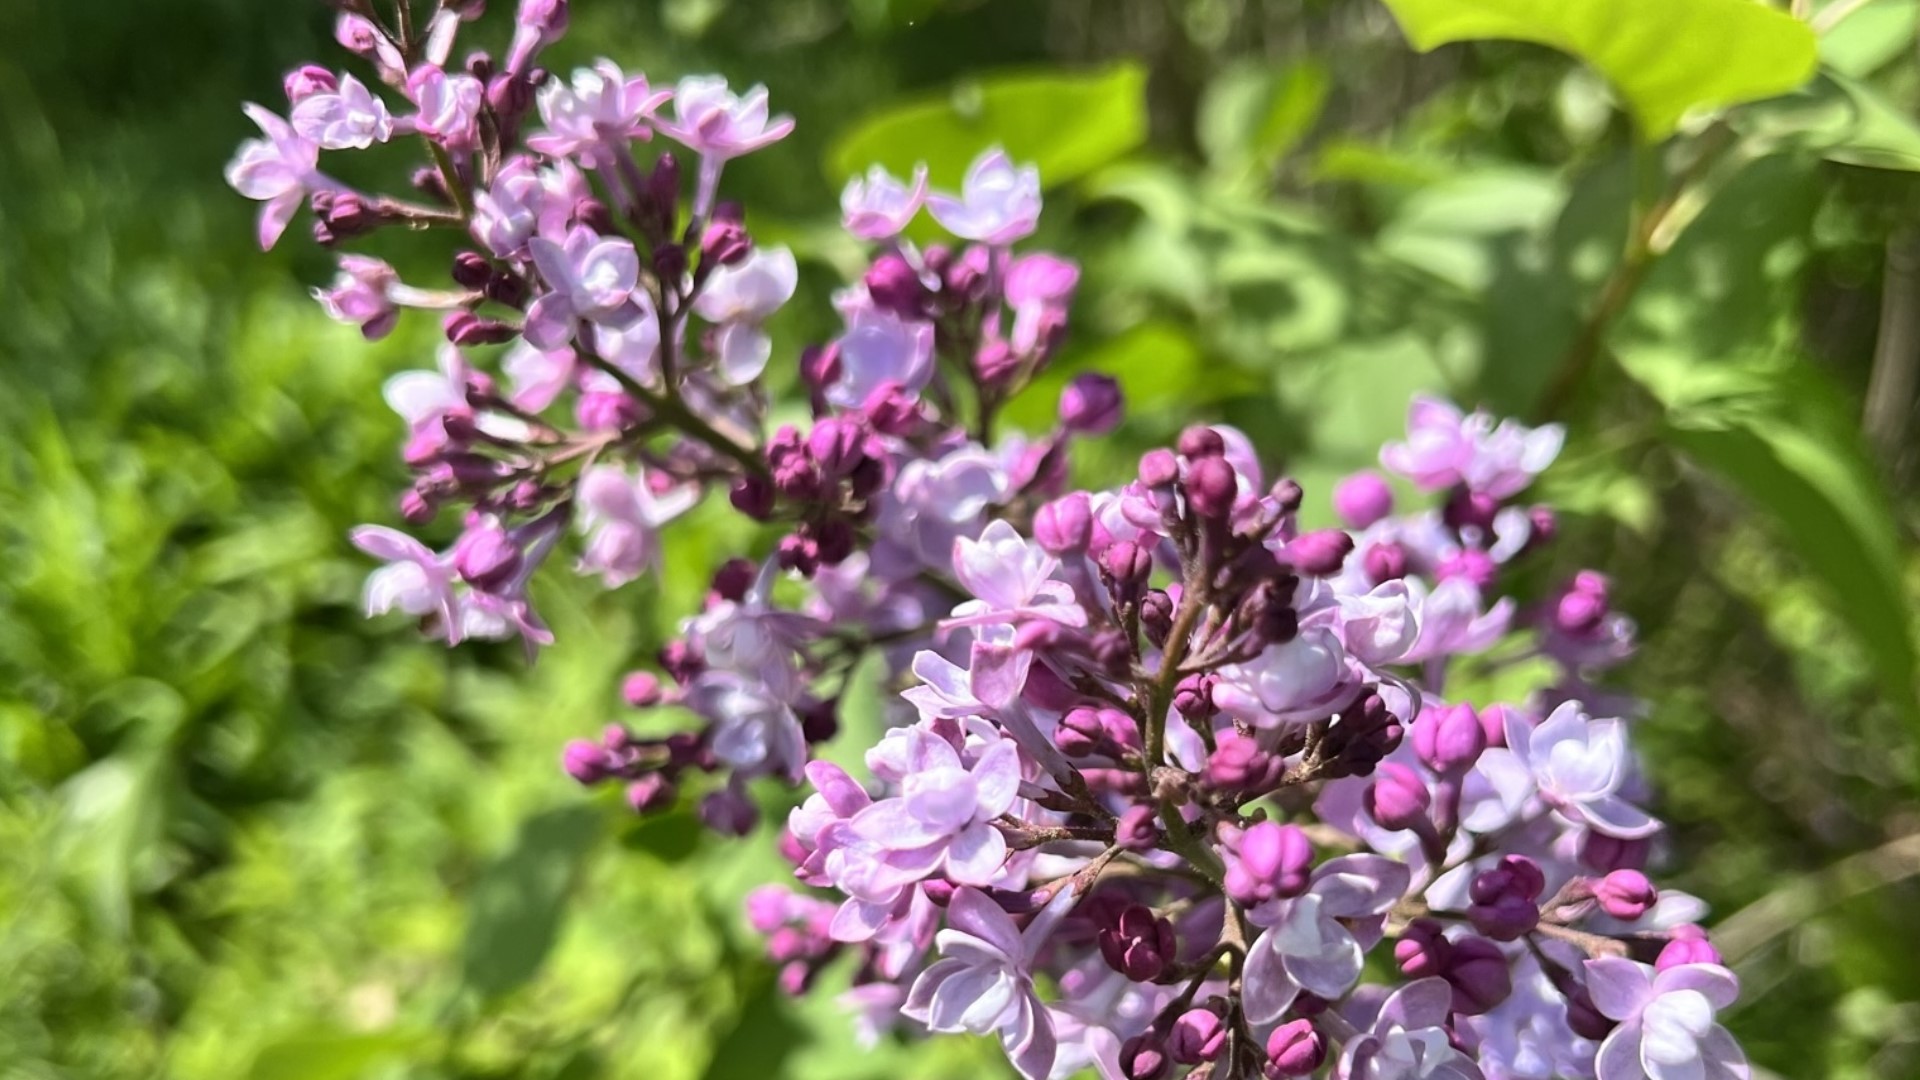 Gardening with Gutner visits the beautiful garden where Todd learns the secrets to gorgeous lilacs.